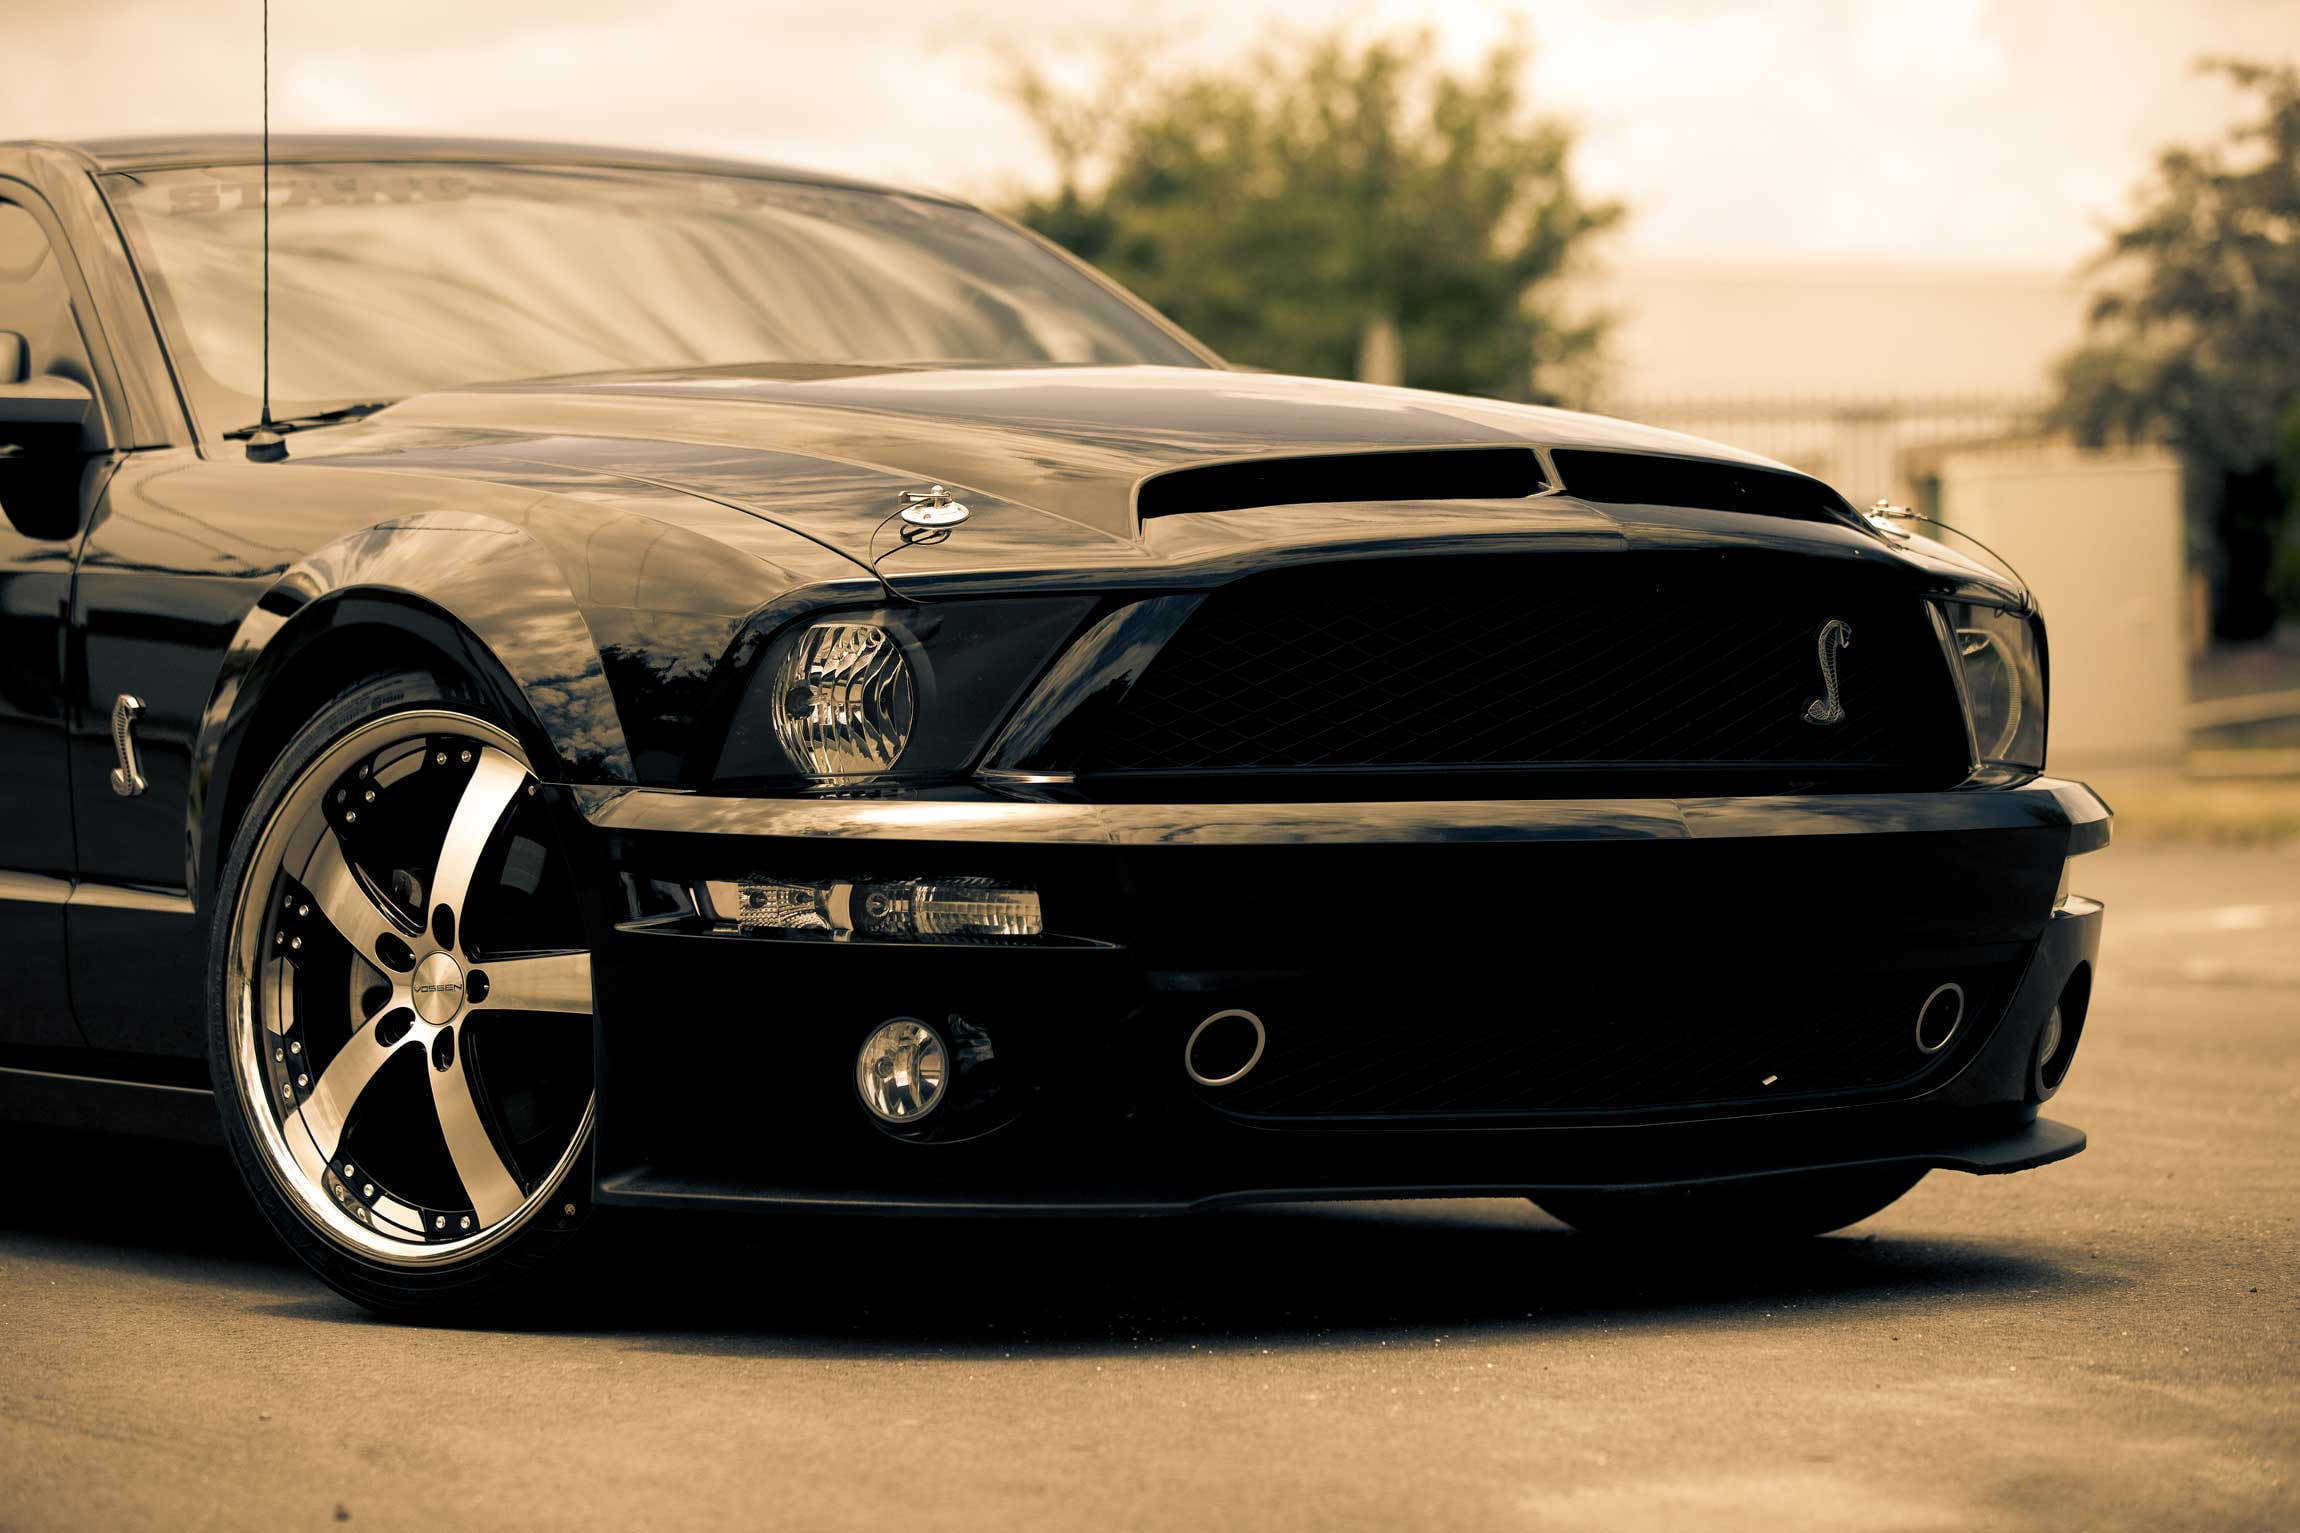 Hd Wallpapers Of Mustang Cars